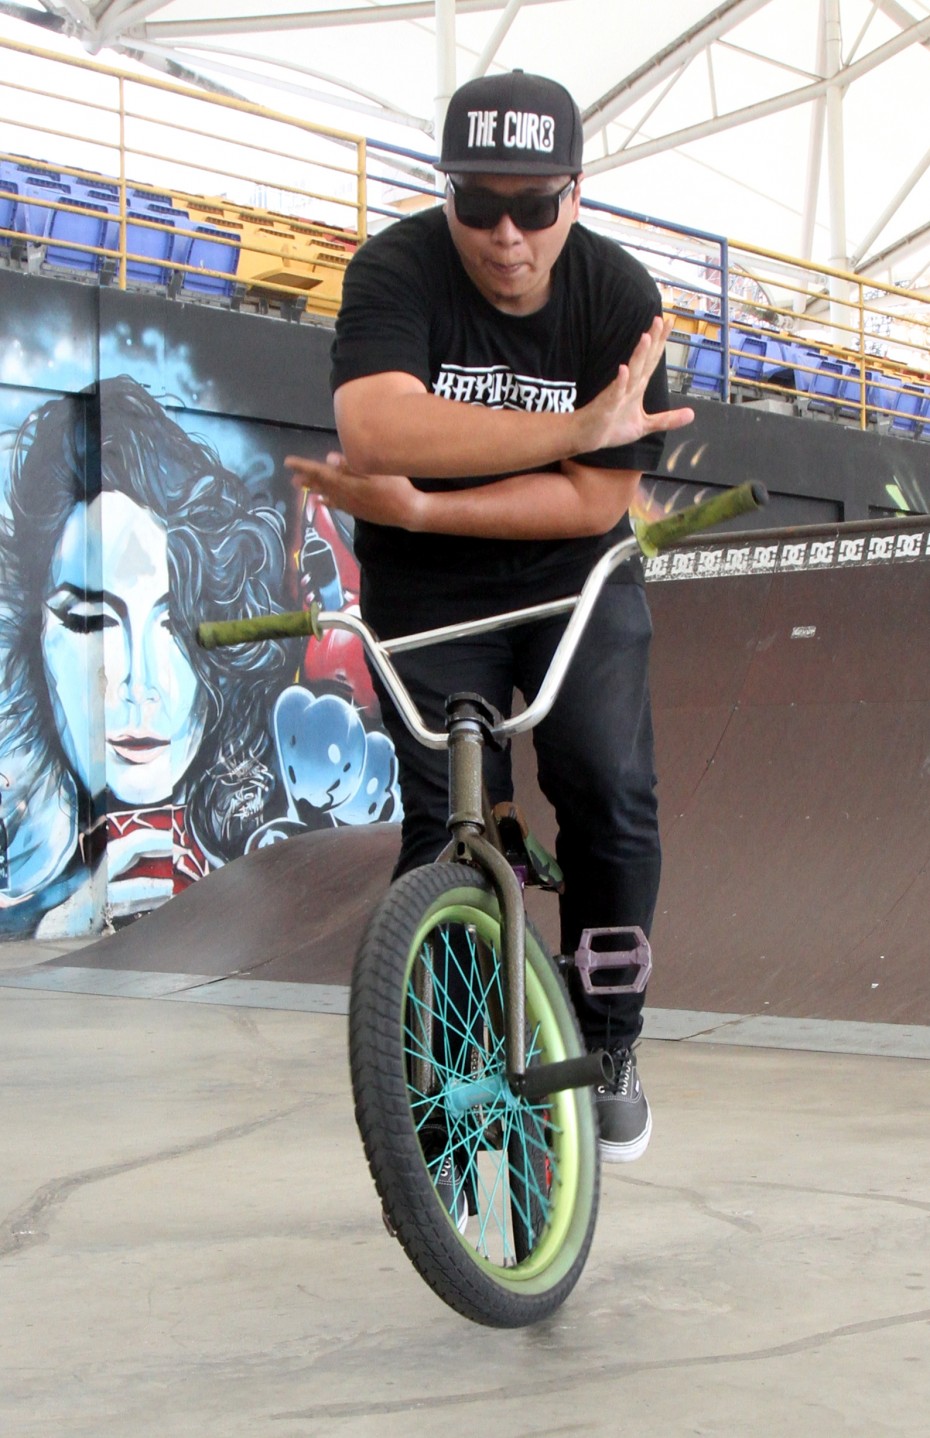 Shahrul Reezwan started BMX riding at the age of 16. Now, the 29-year-old has his own bicycle shop. "When I started, there wasn't any shop in Malaysia selling BMX equipment and bicycle parts. So I took the initiative to start one on my own and riders can easily purchase them instead of ordering online," said Shahrul. Here, he is doing a bar spin on his bicycle.  M. Azhar Arif/The Star 09 Apr 2015